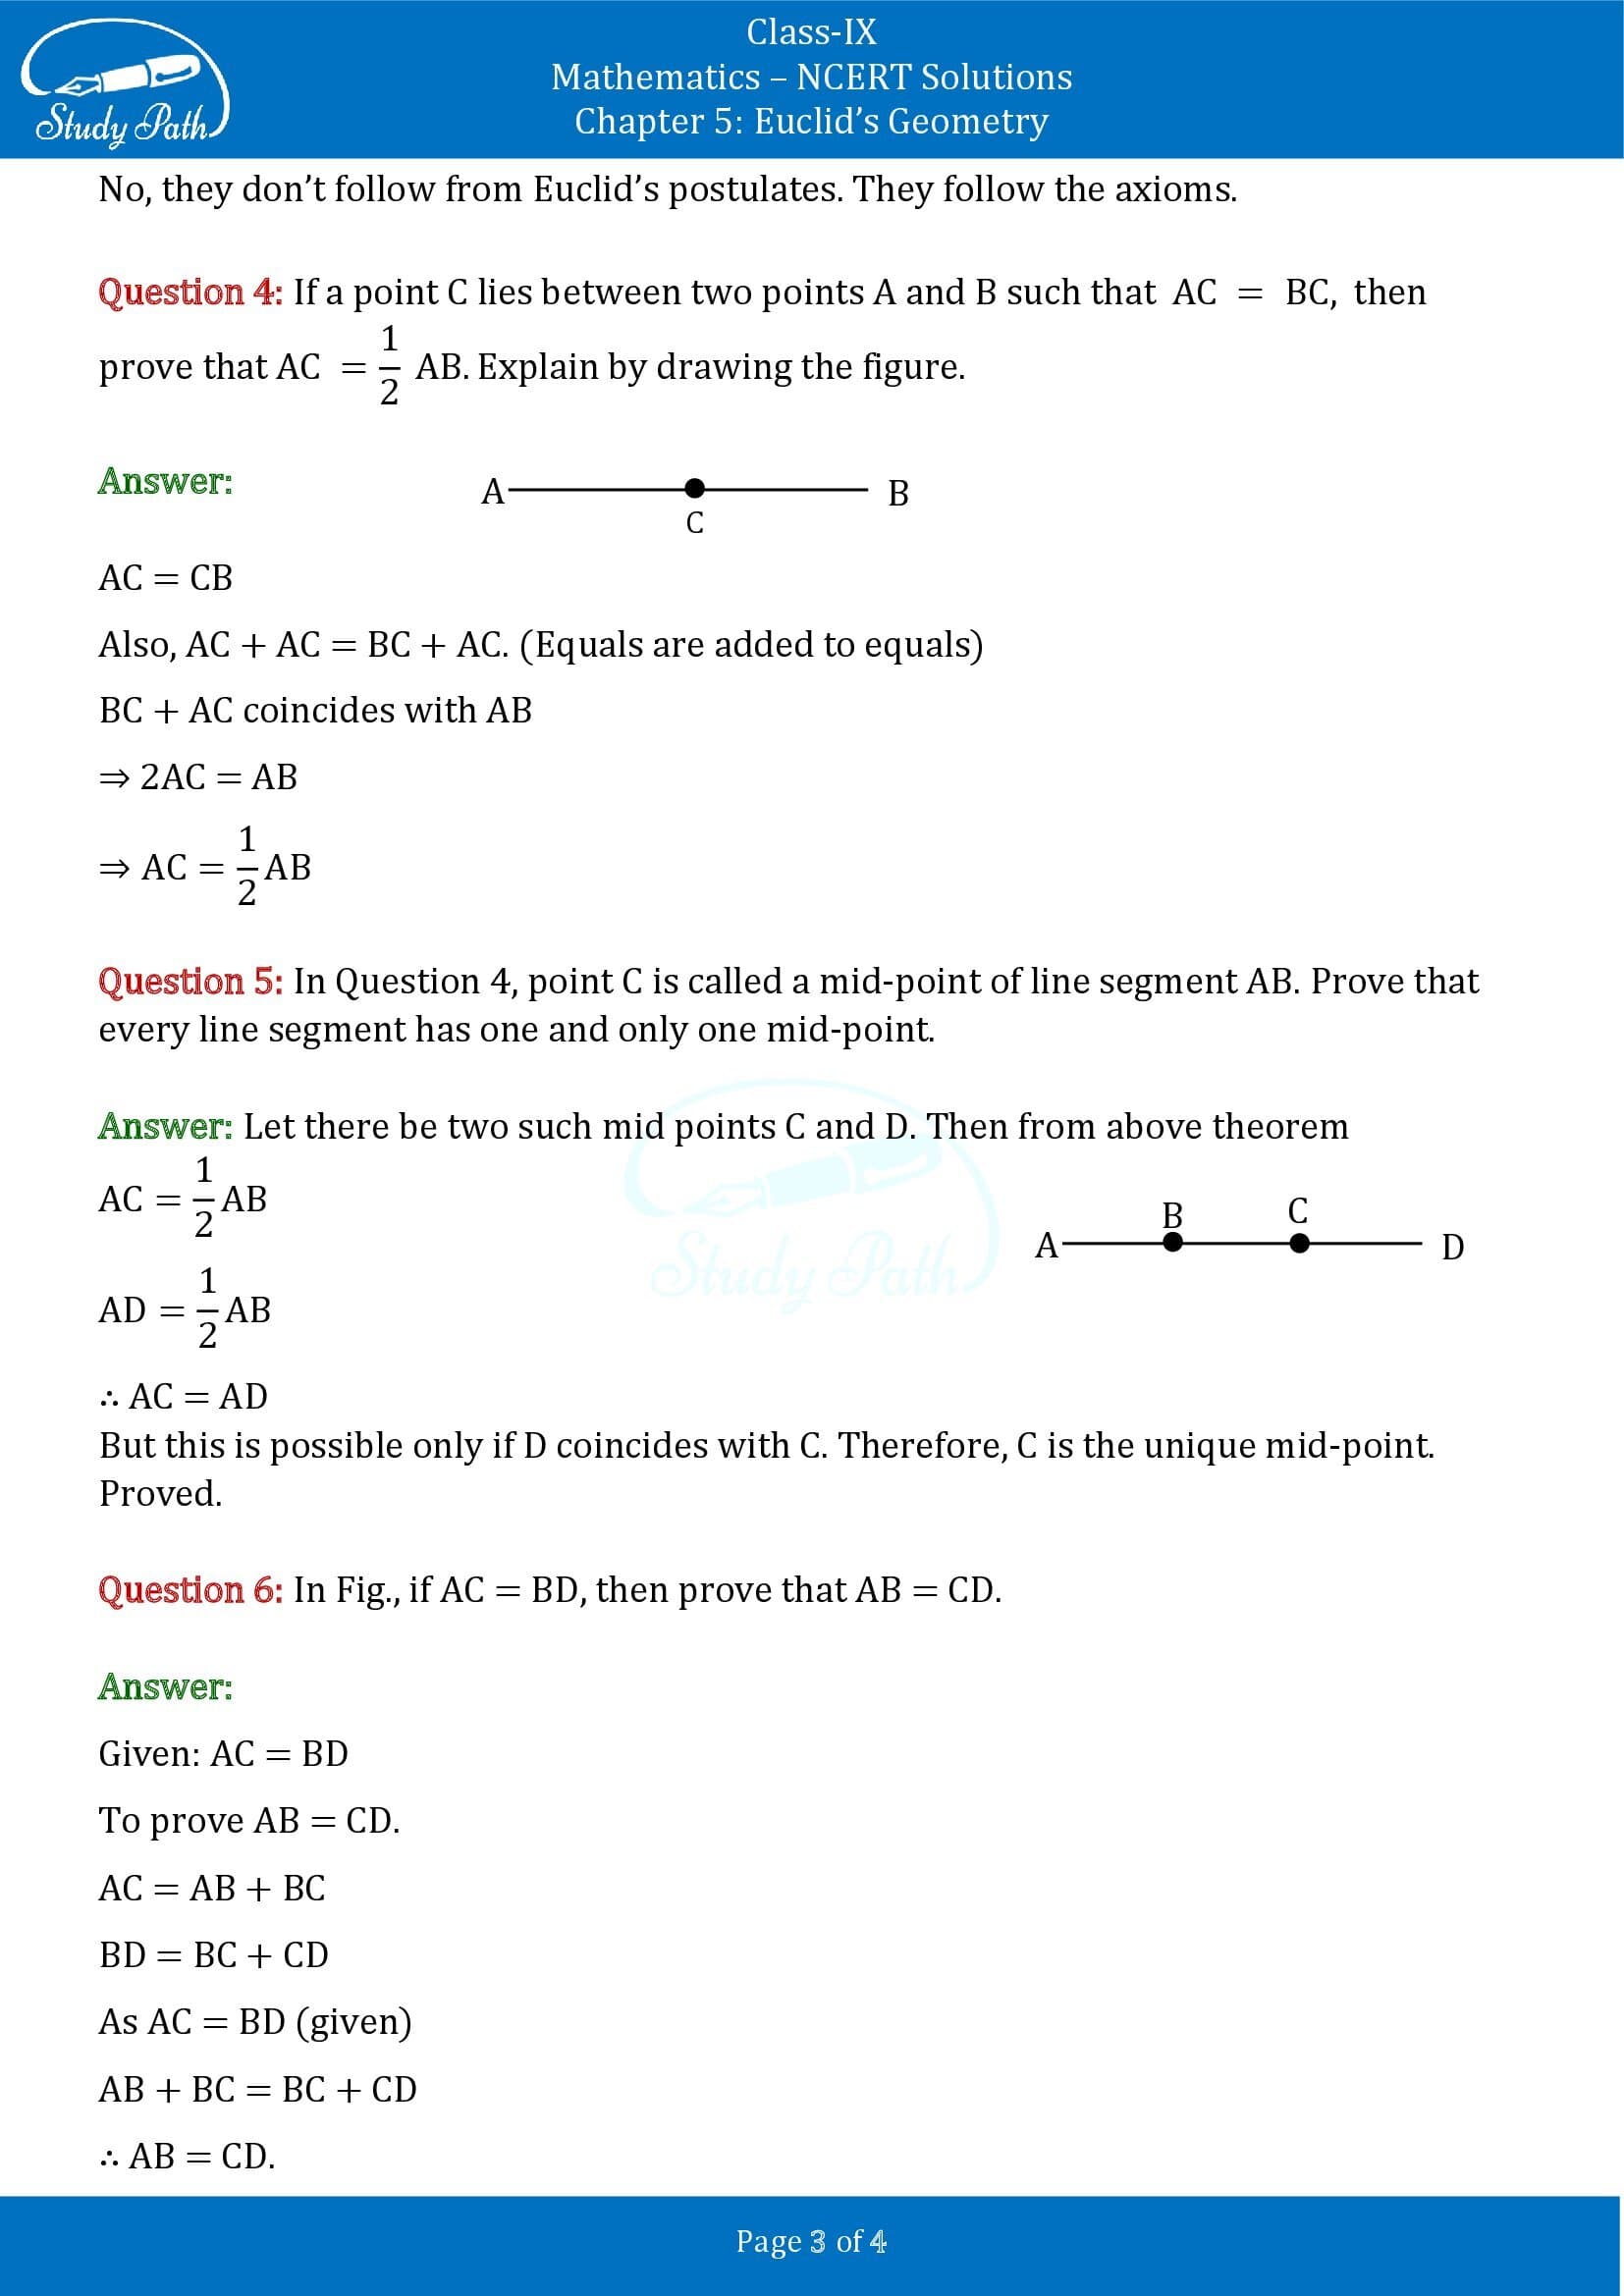 NCERT Solutions for Class 9 Maths Chapter 5 Euclids Geometry Exercise 5.1 00003